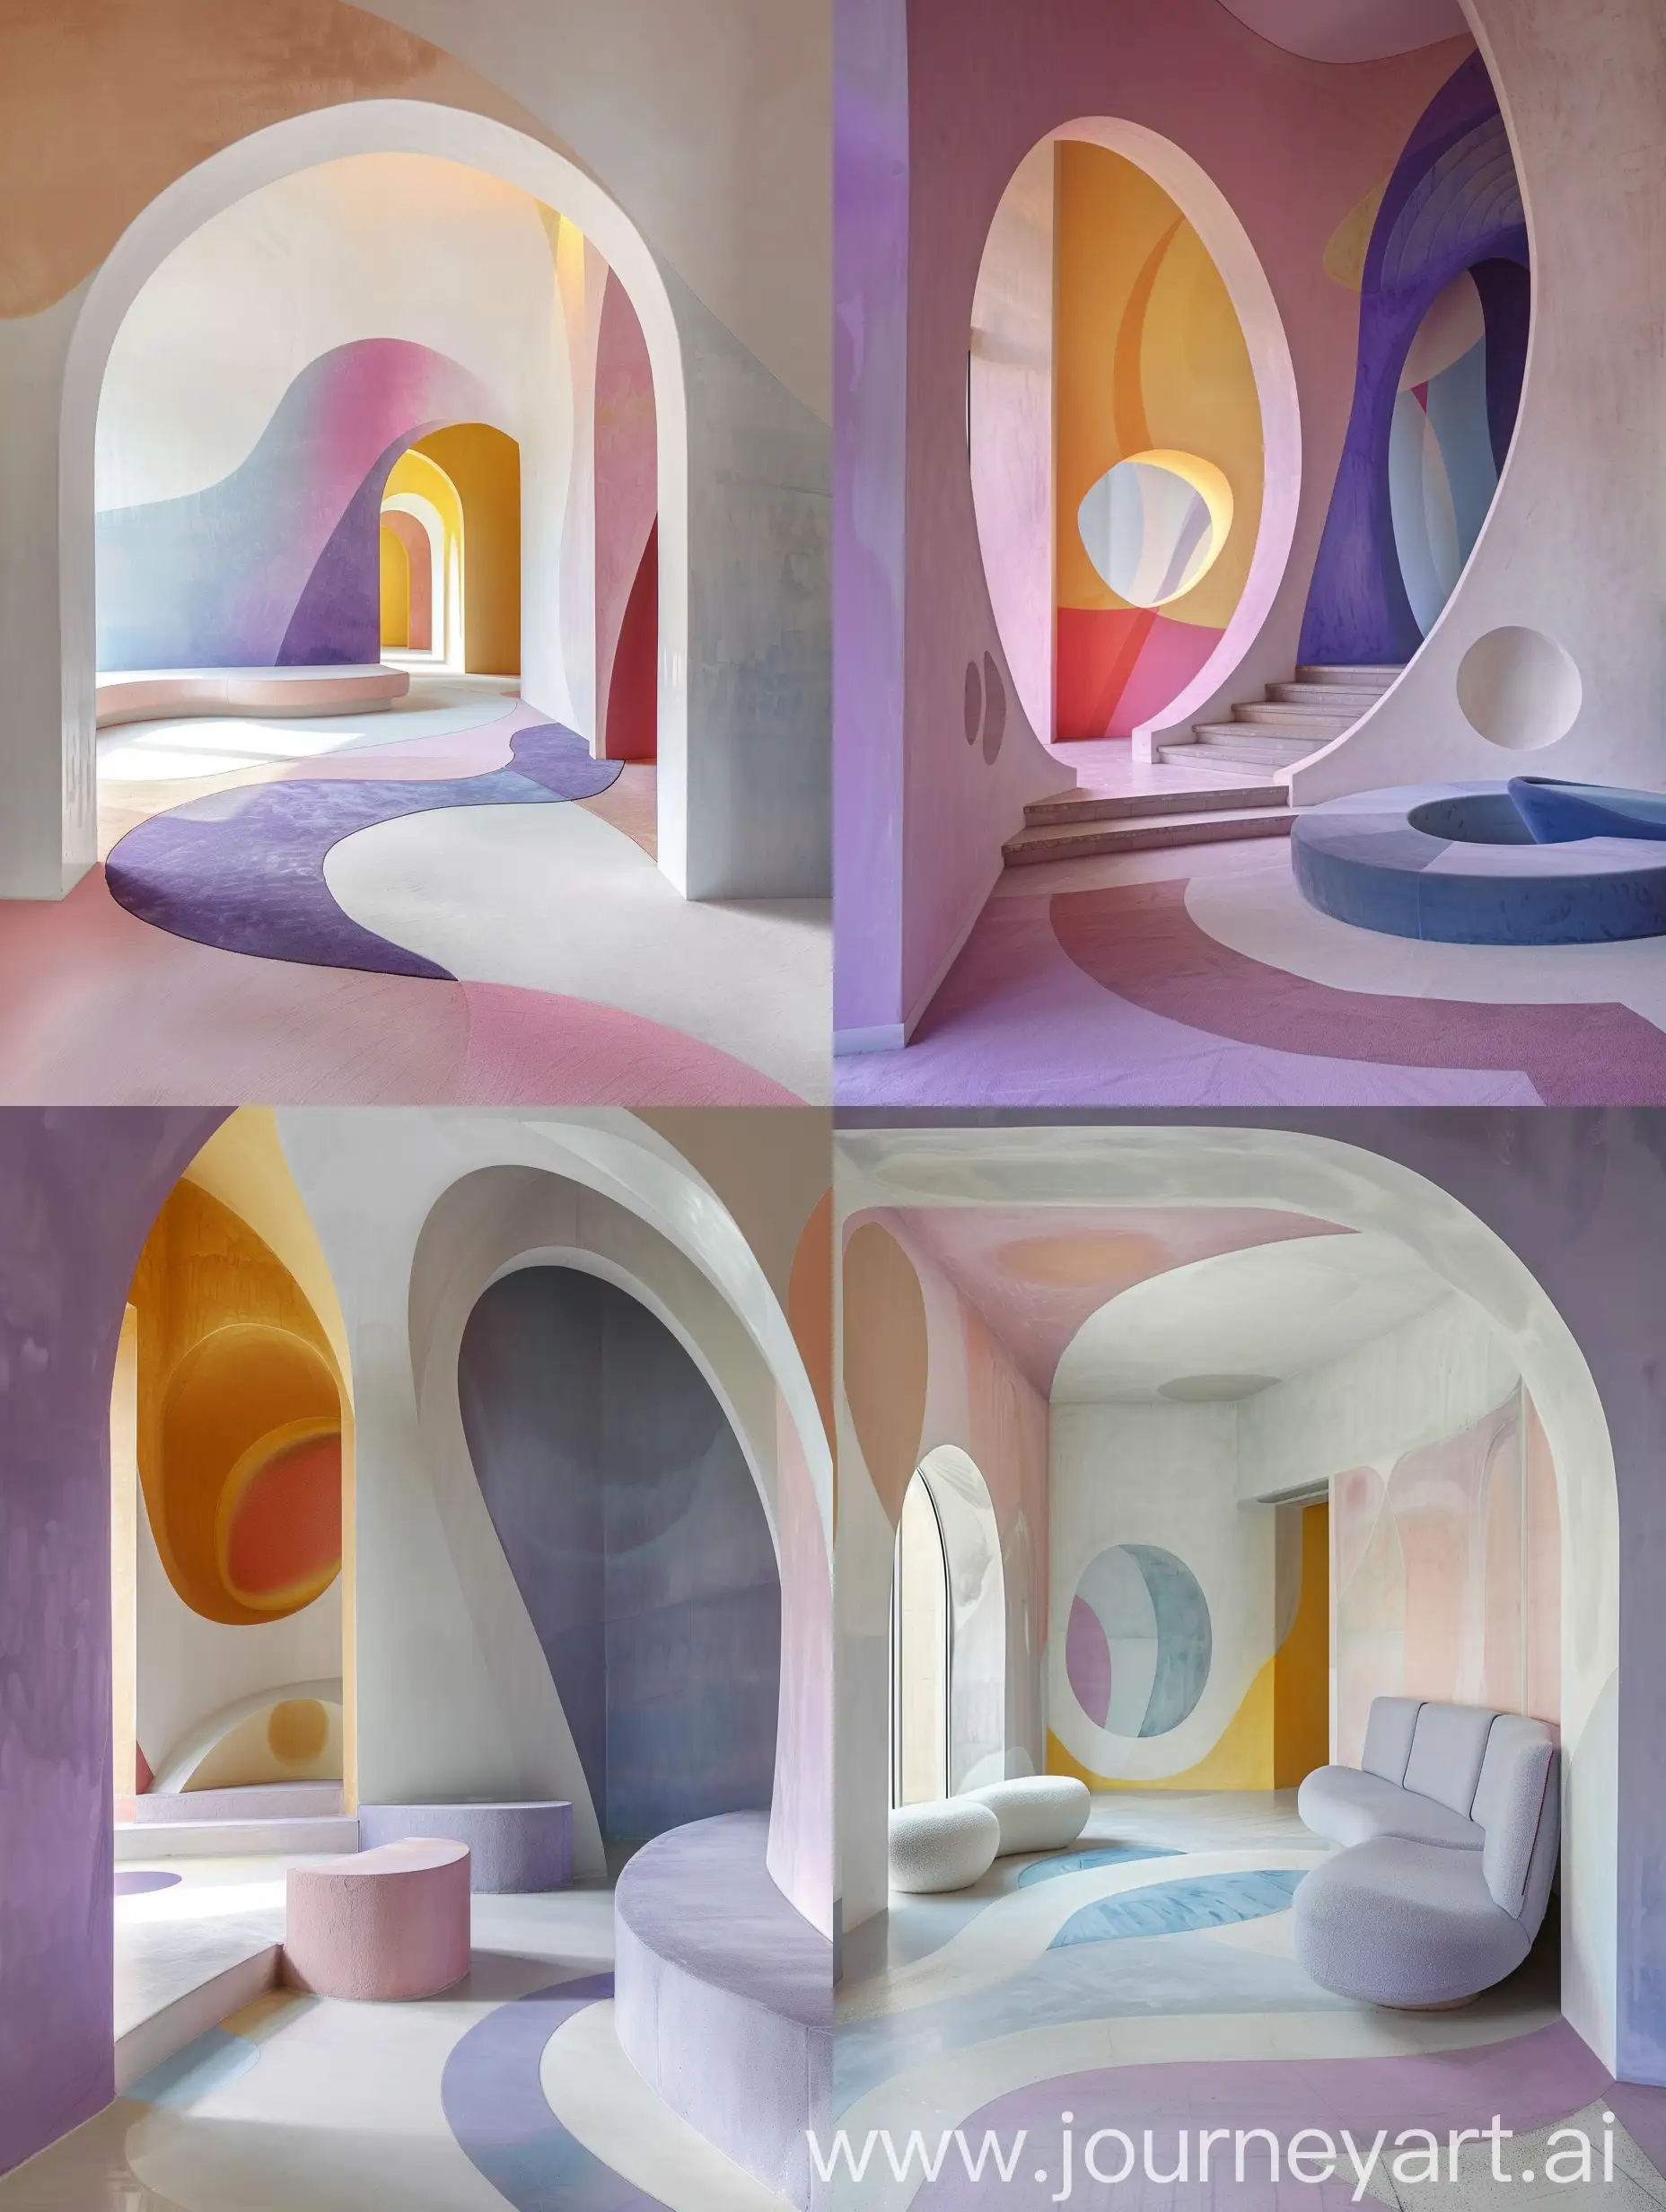 /imagine A meditation room designed in the style of abstractionism and paintings by Hilma af Klint, featuring a color palette of white, lilac, blue, pink, and yellow. The room has smooth lines and curved surfaces throughout. One wall is replaced by a semi-circular panoramic floor-to-ceiling window. The design is innovative and out of the box, creating a serene and inspiring environment.
